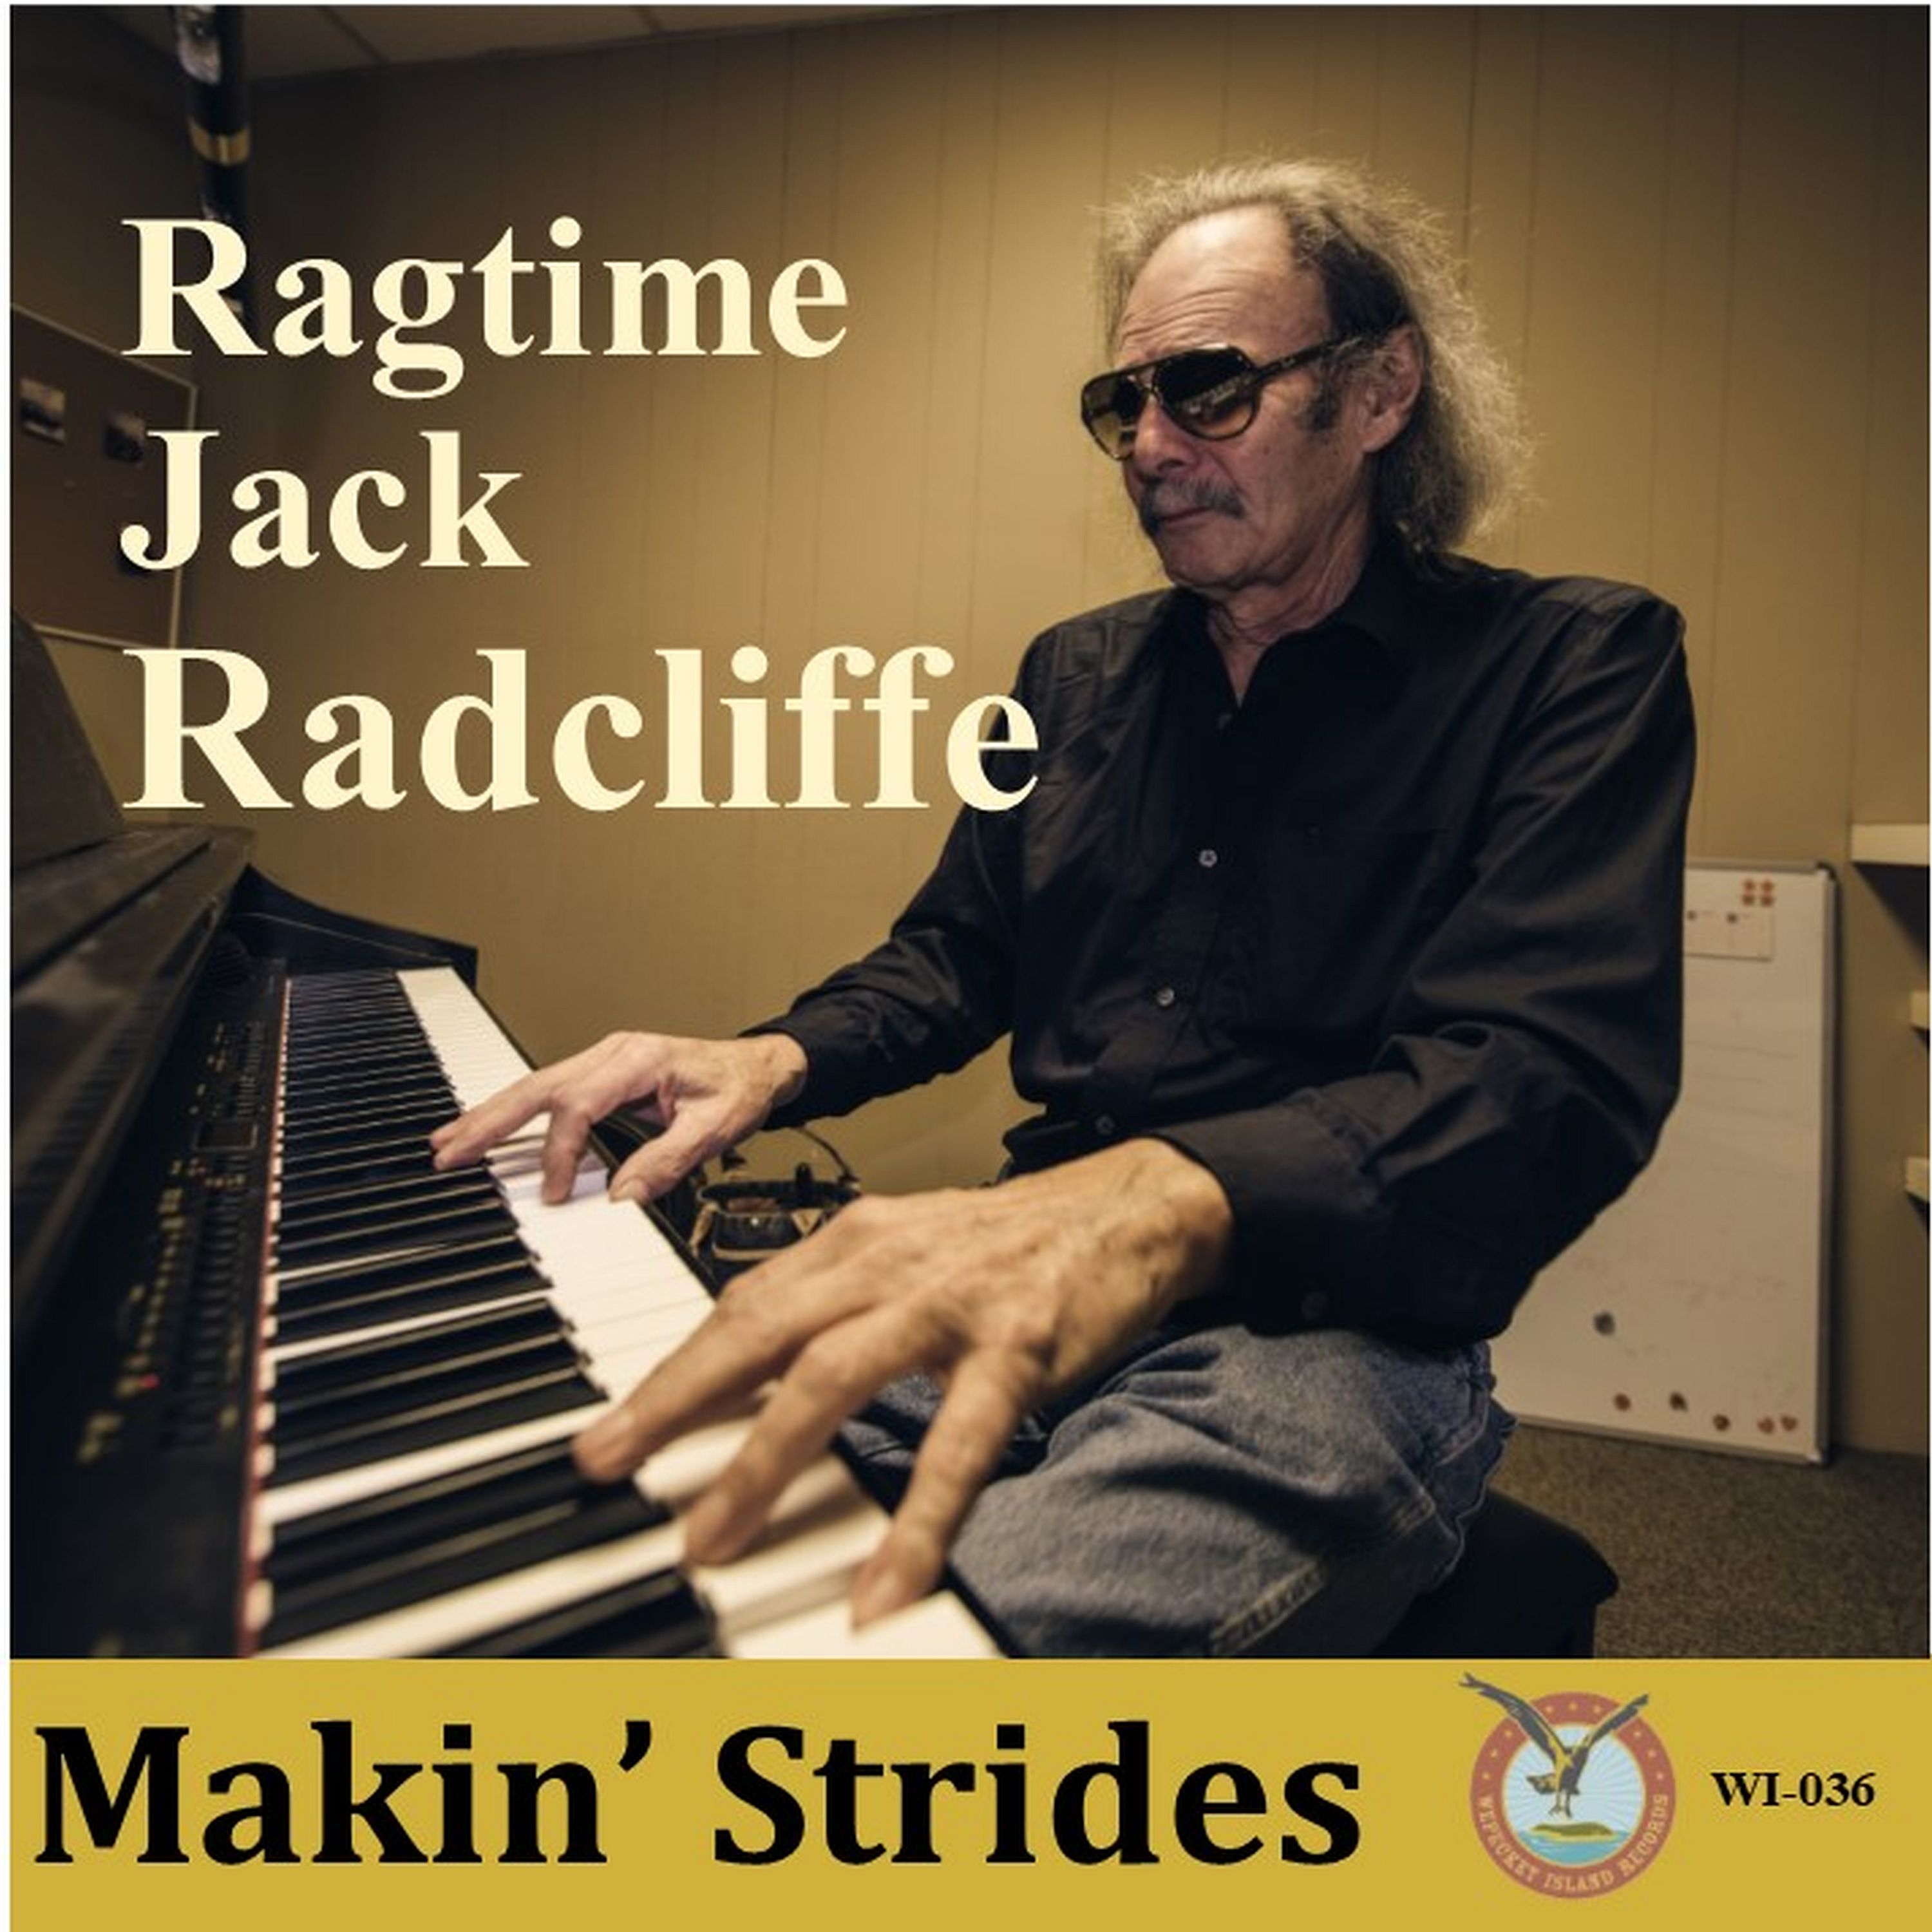 Honky Tonk piano, Country blues by Ragtime Jack Radcliffe